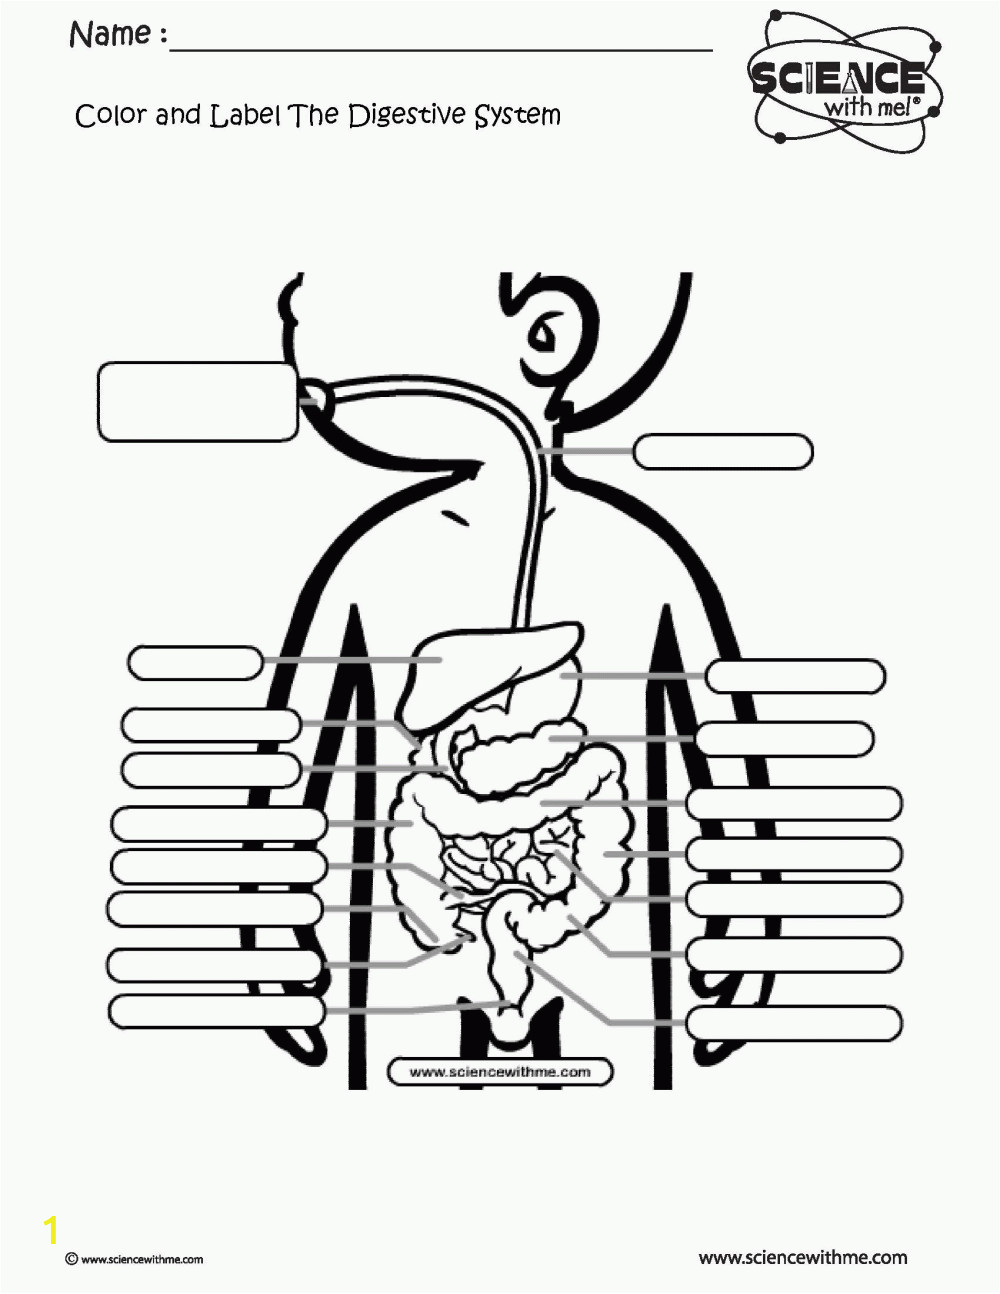 coloring page for digestive system